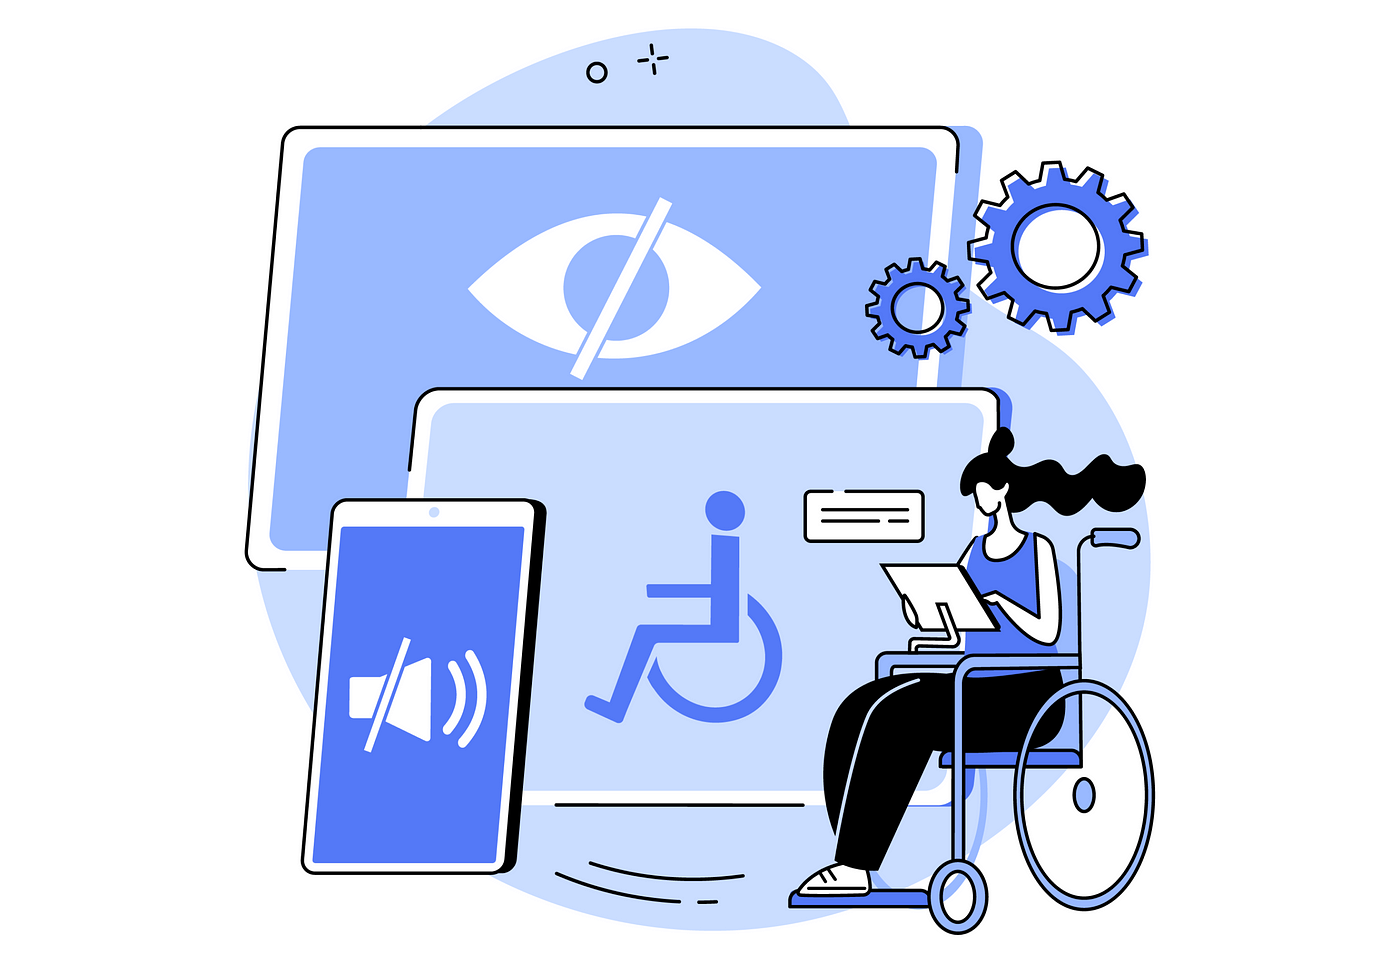 Blue-toned graphic with woman who has long dark wavy hair in a wheelchair using a screen device. There are three large screens with 'no eye', 'no sound', and wheelchair icons in the background.